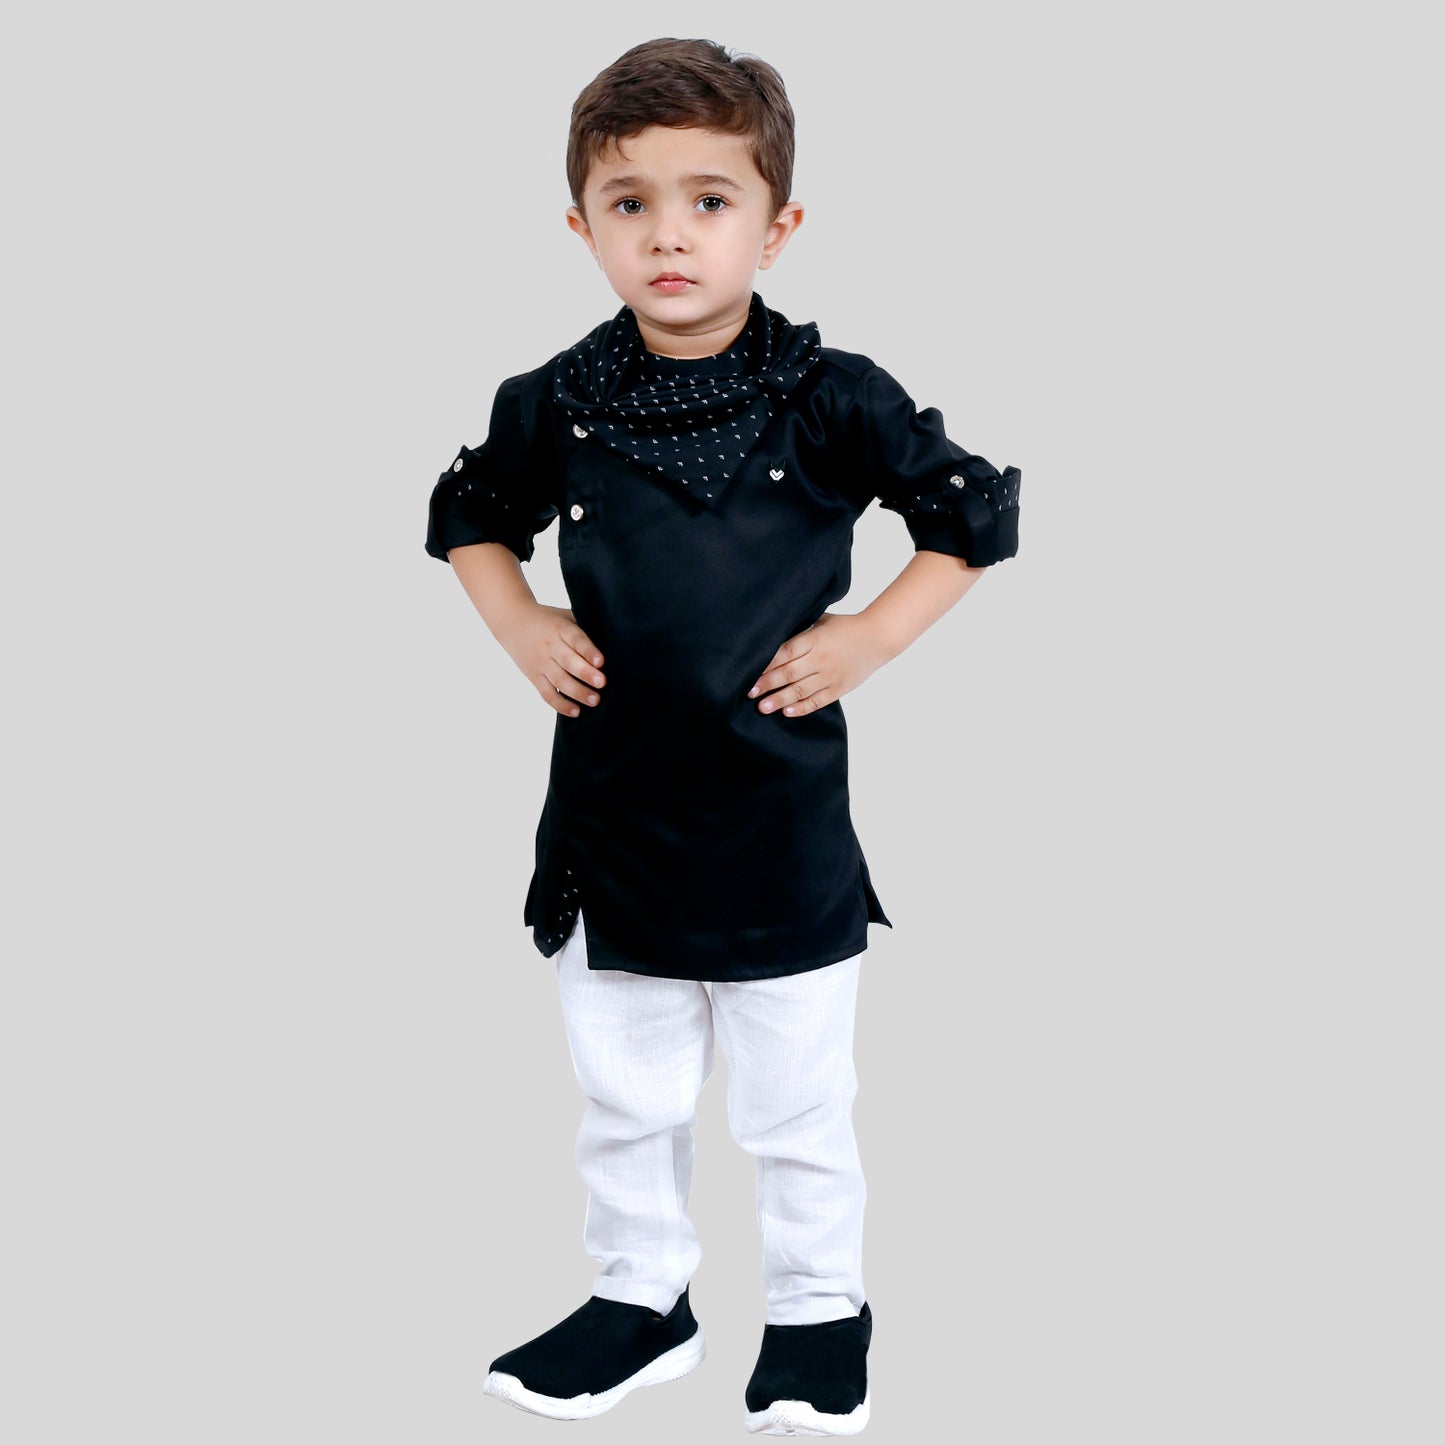 Super Stylish and Comfortable Ethnic Wear Set with Kurta with Detachable Cowl Neck Bottoms